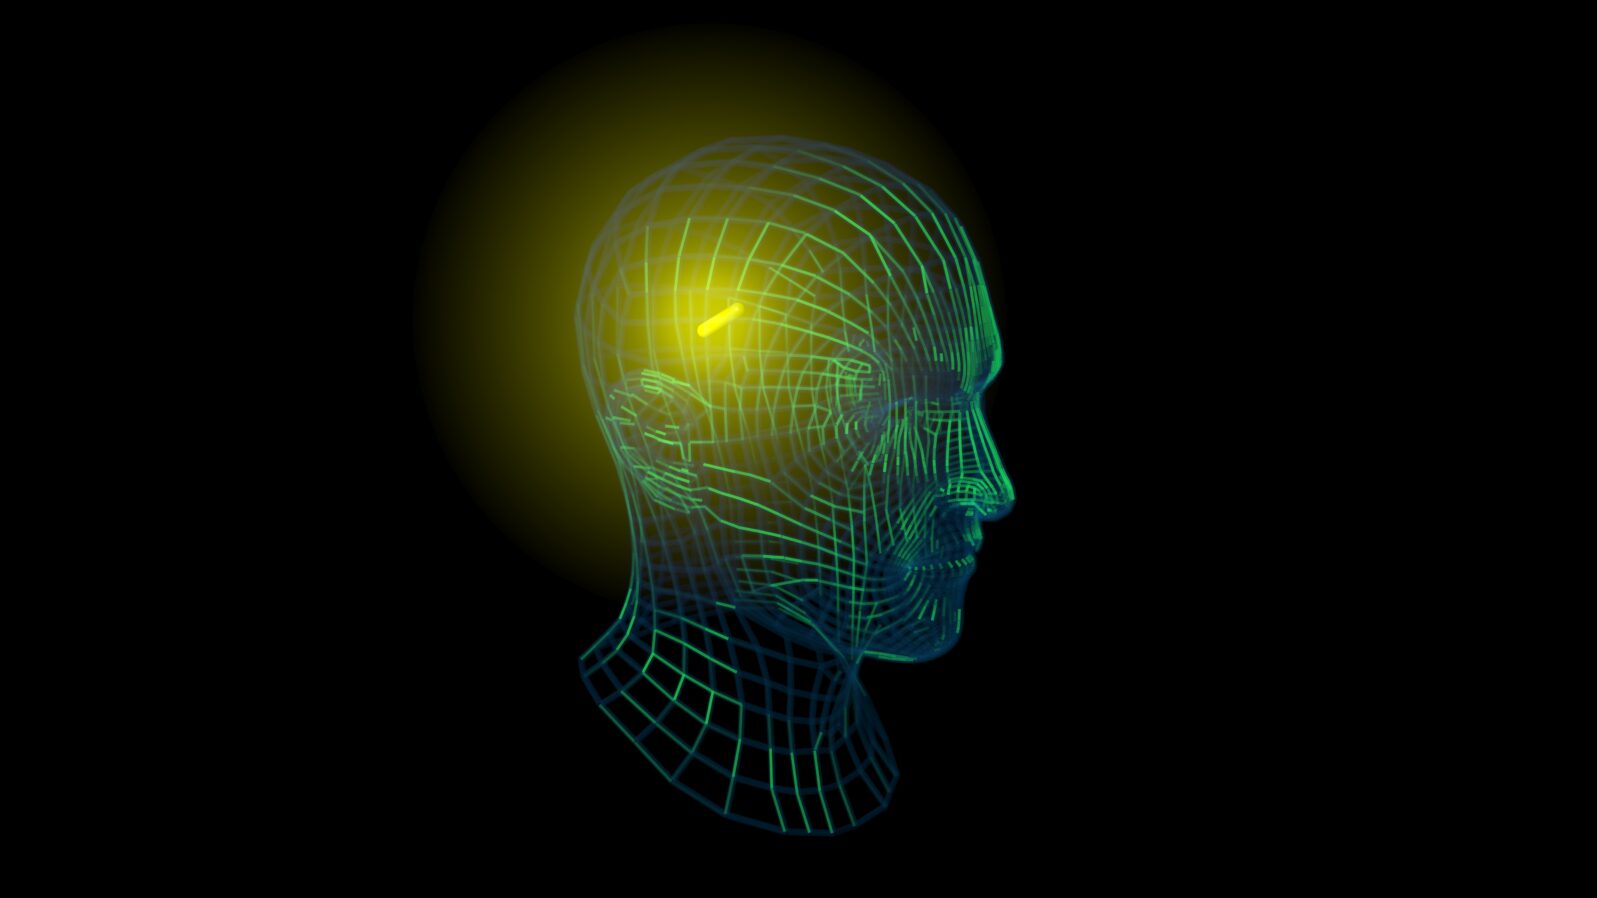 Glowing yellow implant inside human head. Uses: medical, alien, future tech where monitoring and transmission of  biotelemetry is involved.